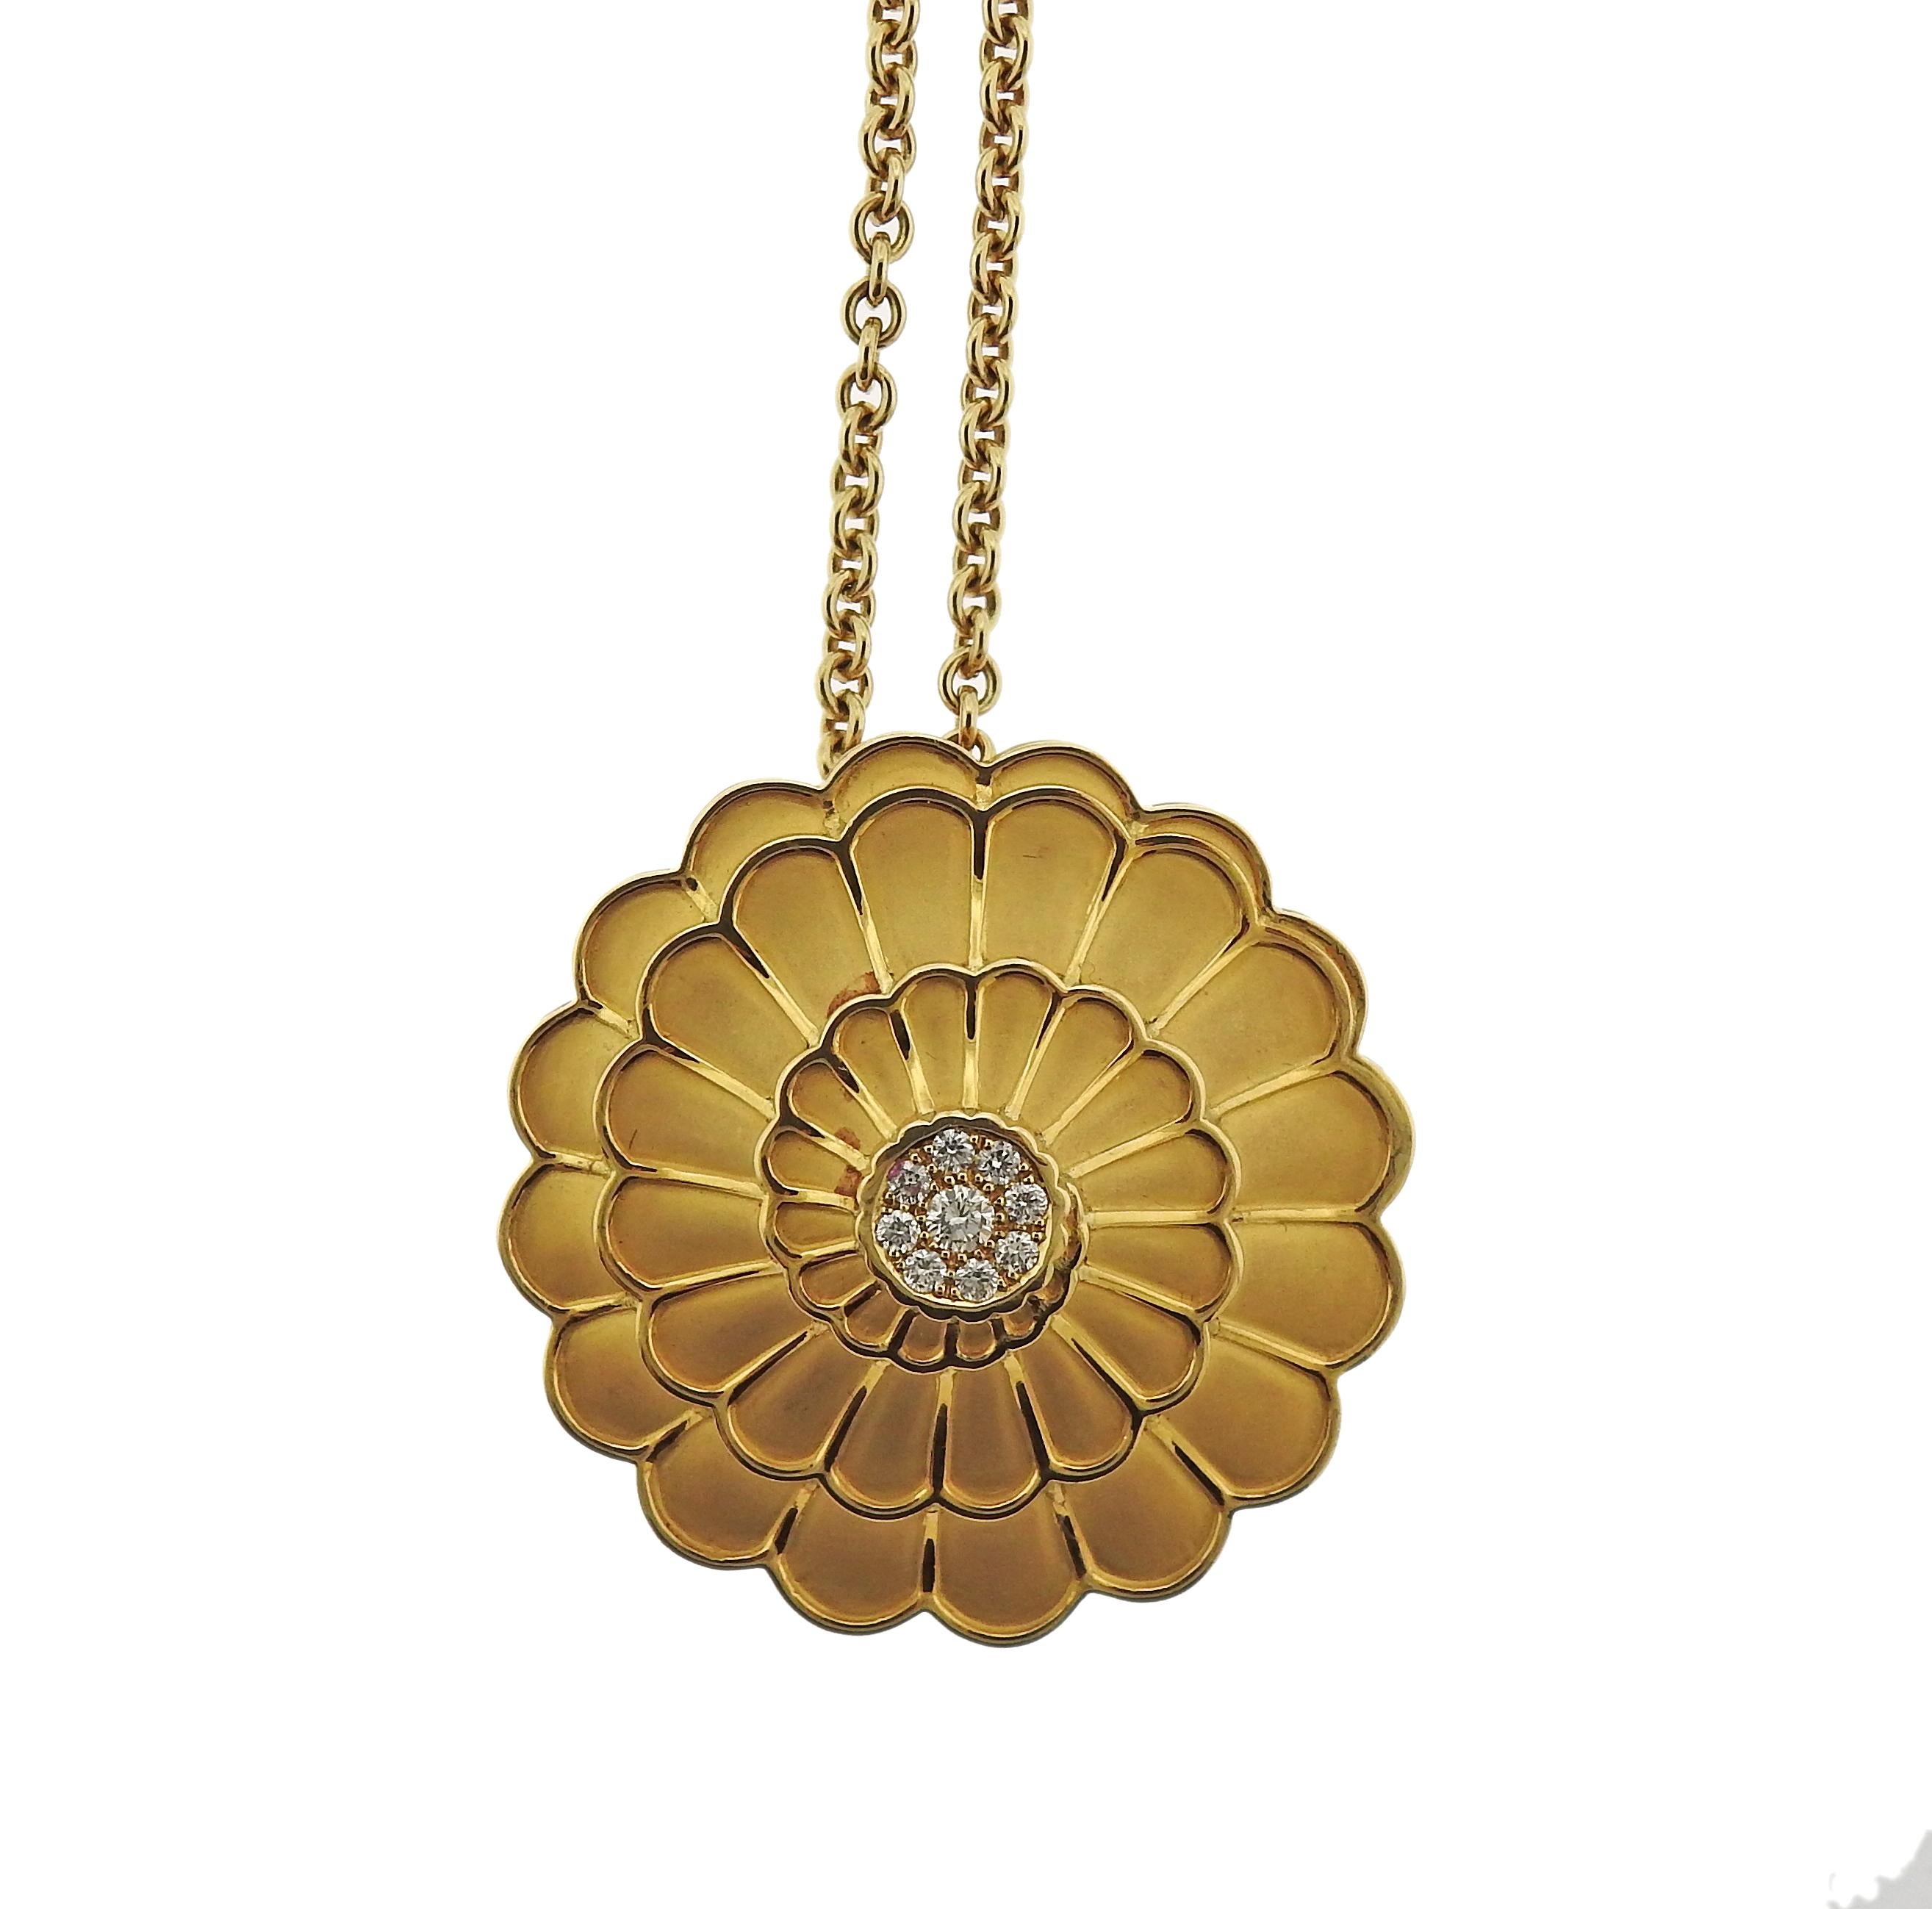 18k yellow gold swirl pendant necklace by Carrera Y Carrera from Afrotita collection. Necklace is 28